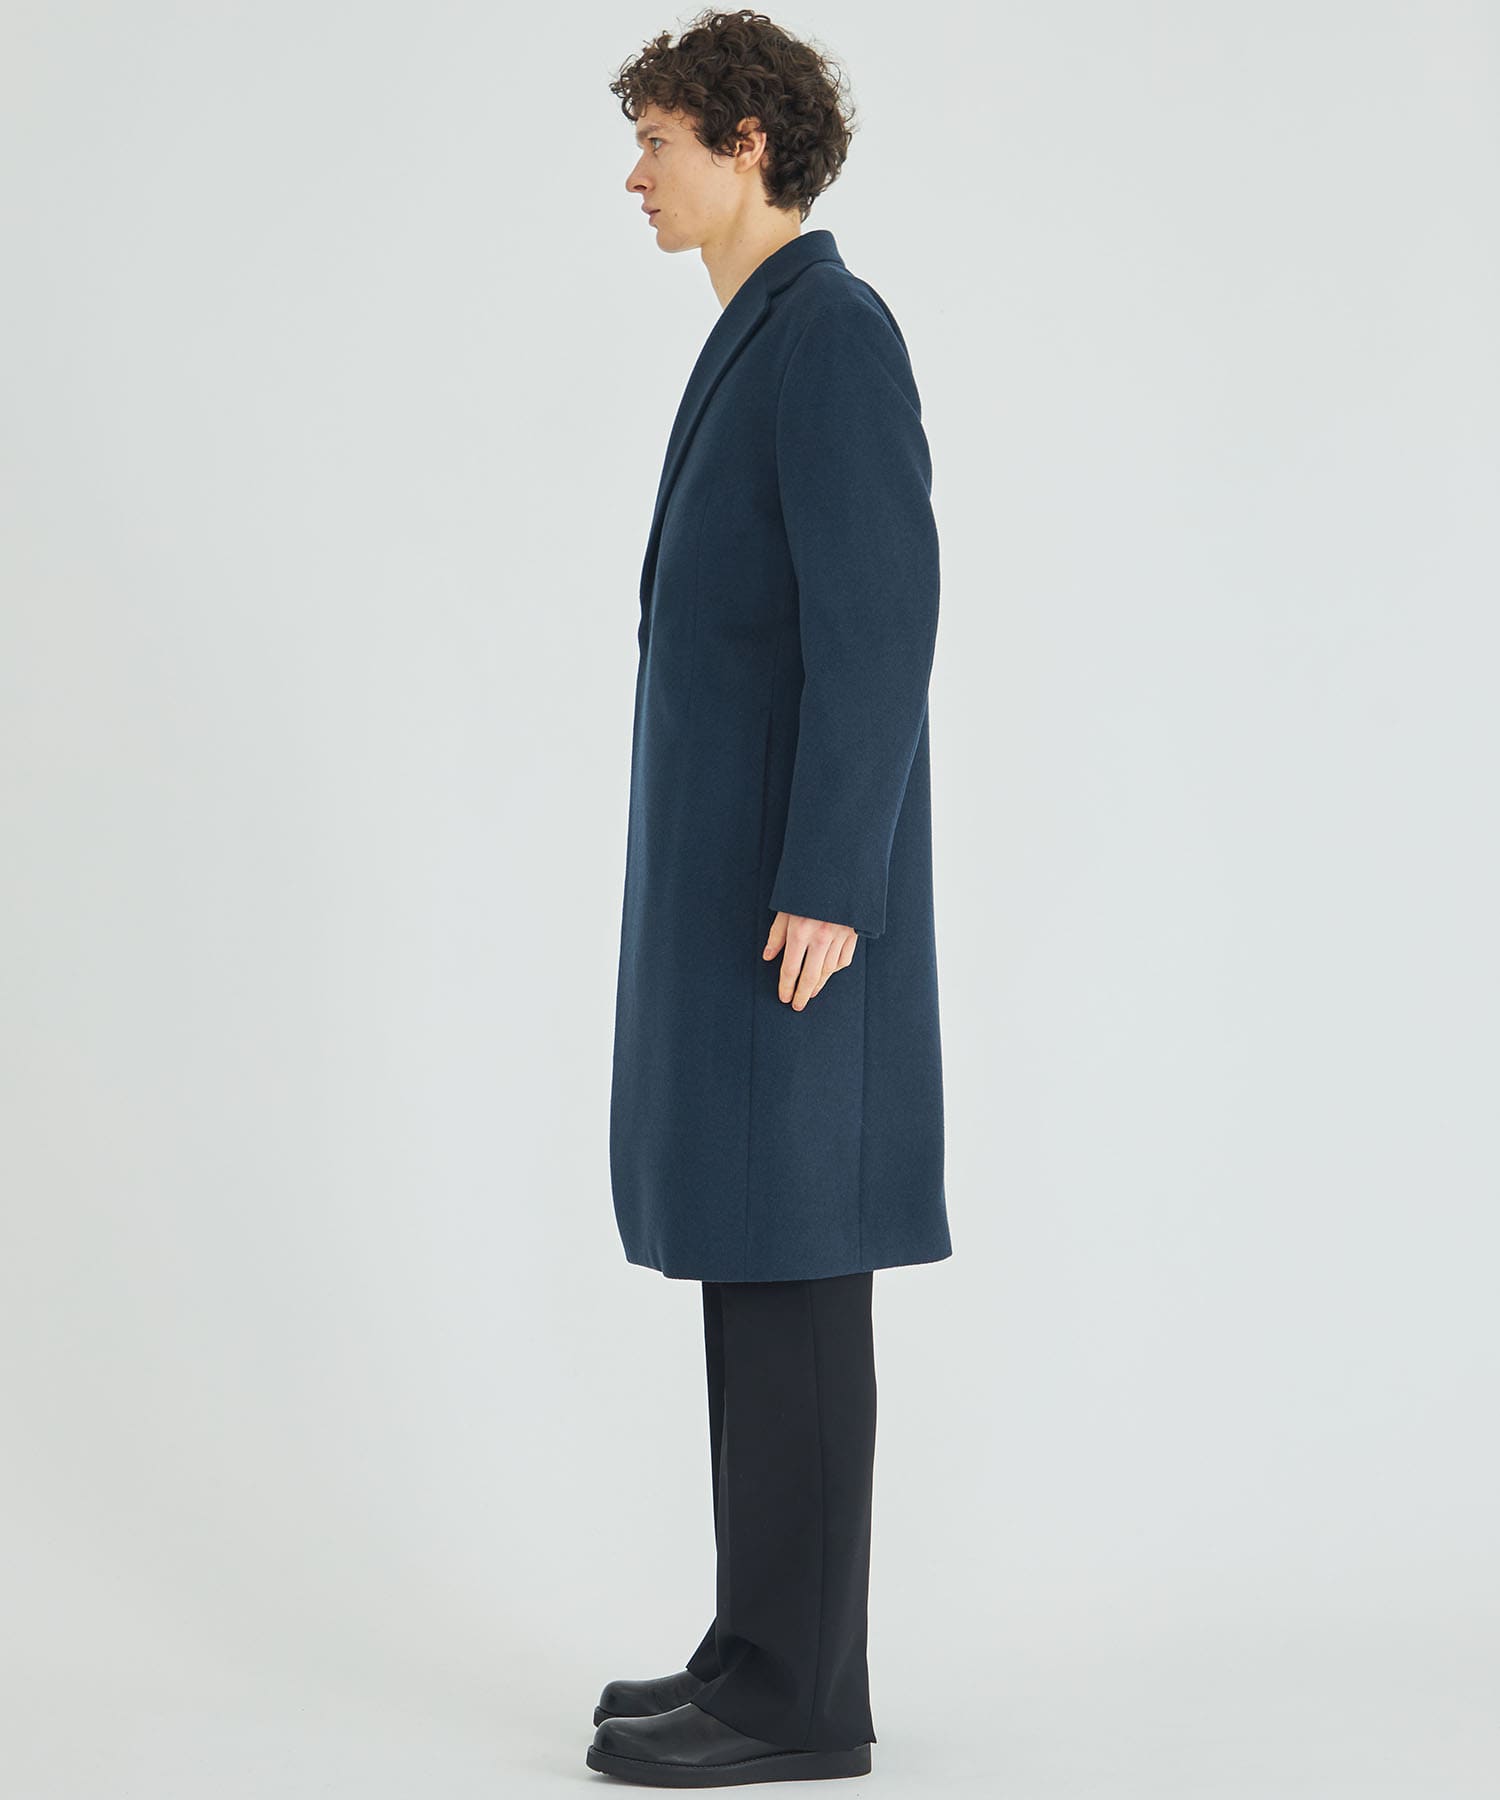 CASHMERE DOUBLE CHESTER COAT | BESPOKE TOKYO